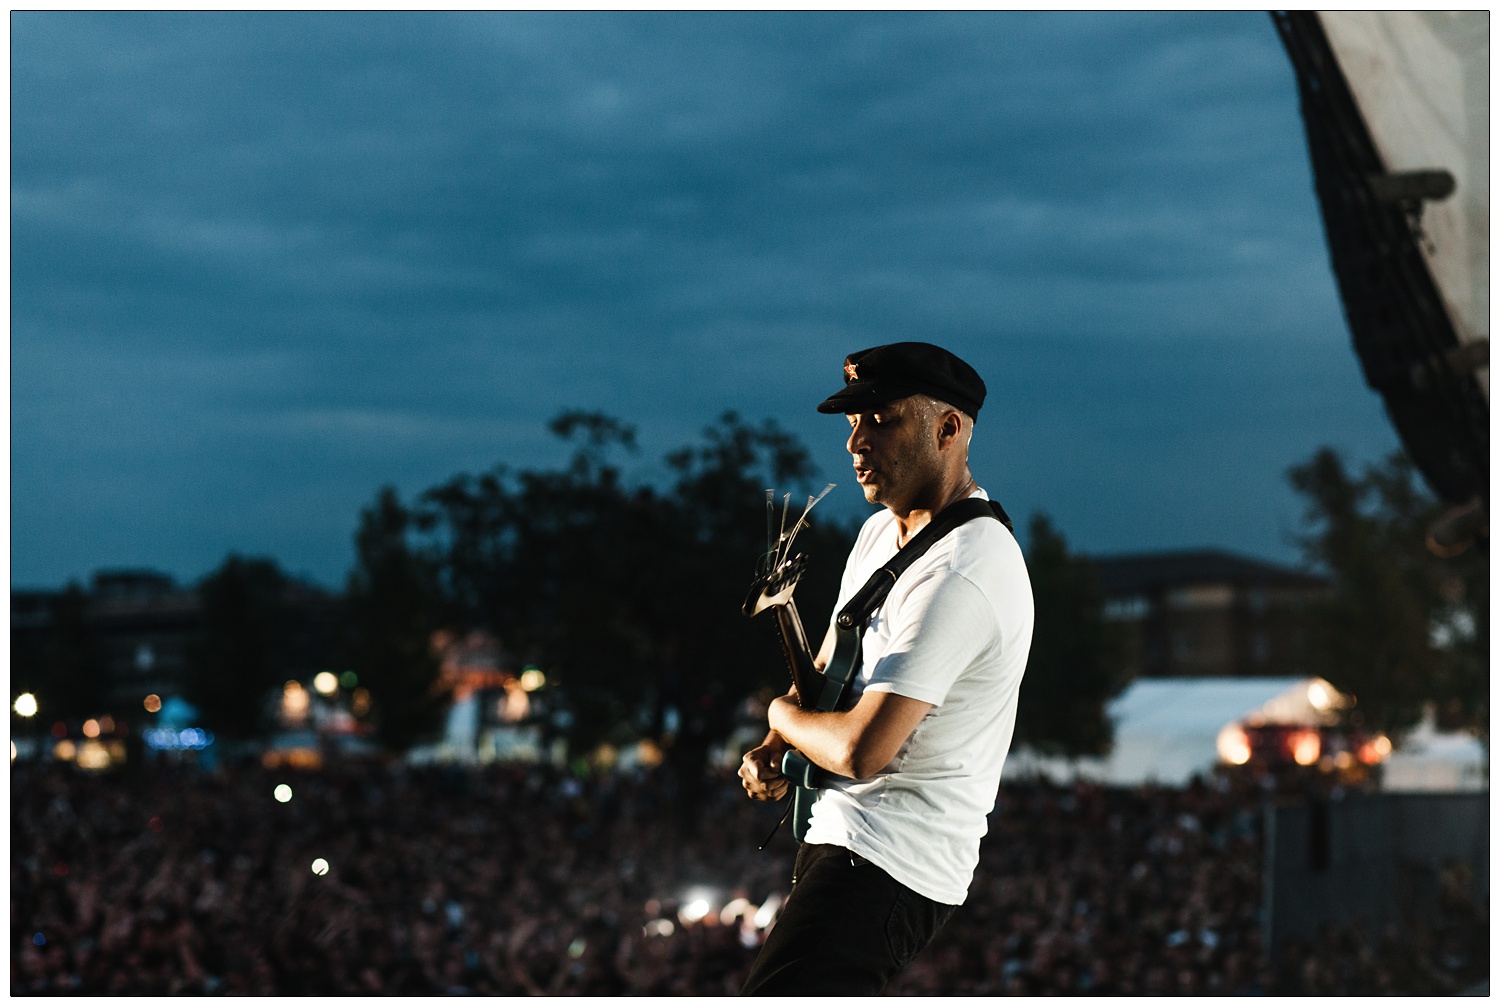 A view of the sky and the crowd, as Tom Morello plays at the Rage Against The Machine gig in Finsbury Park